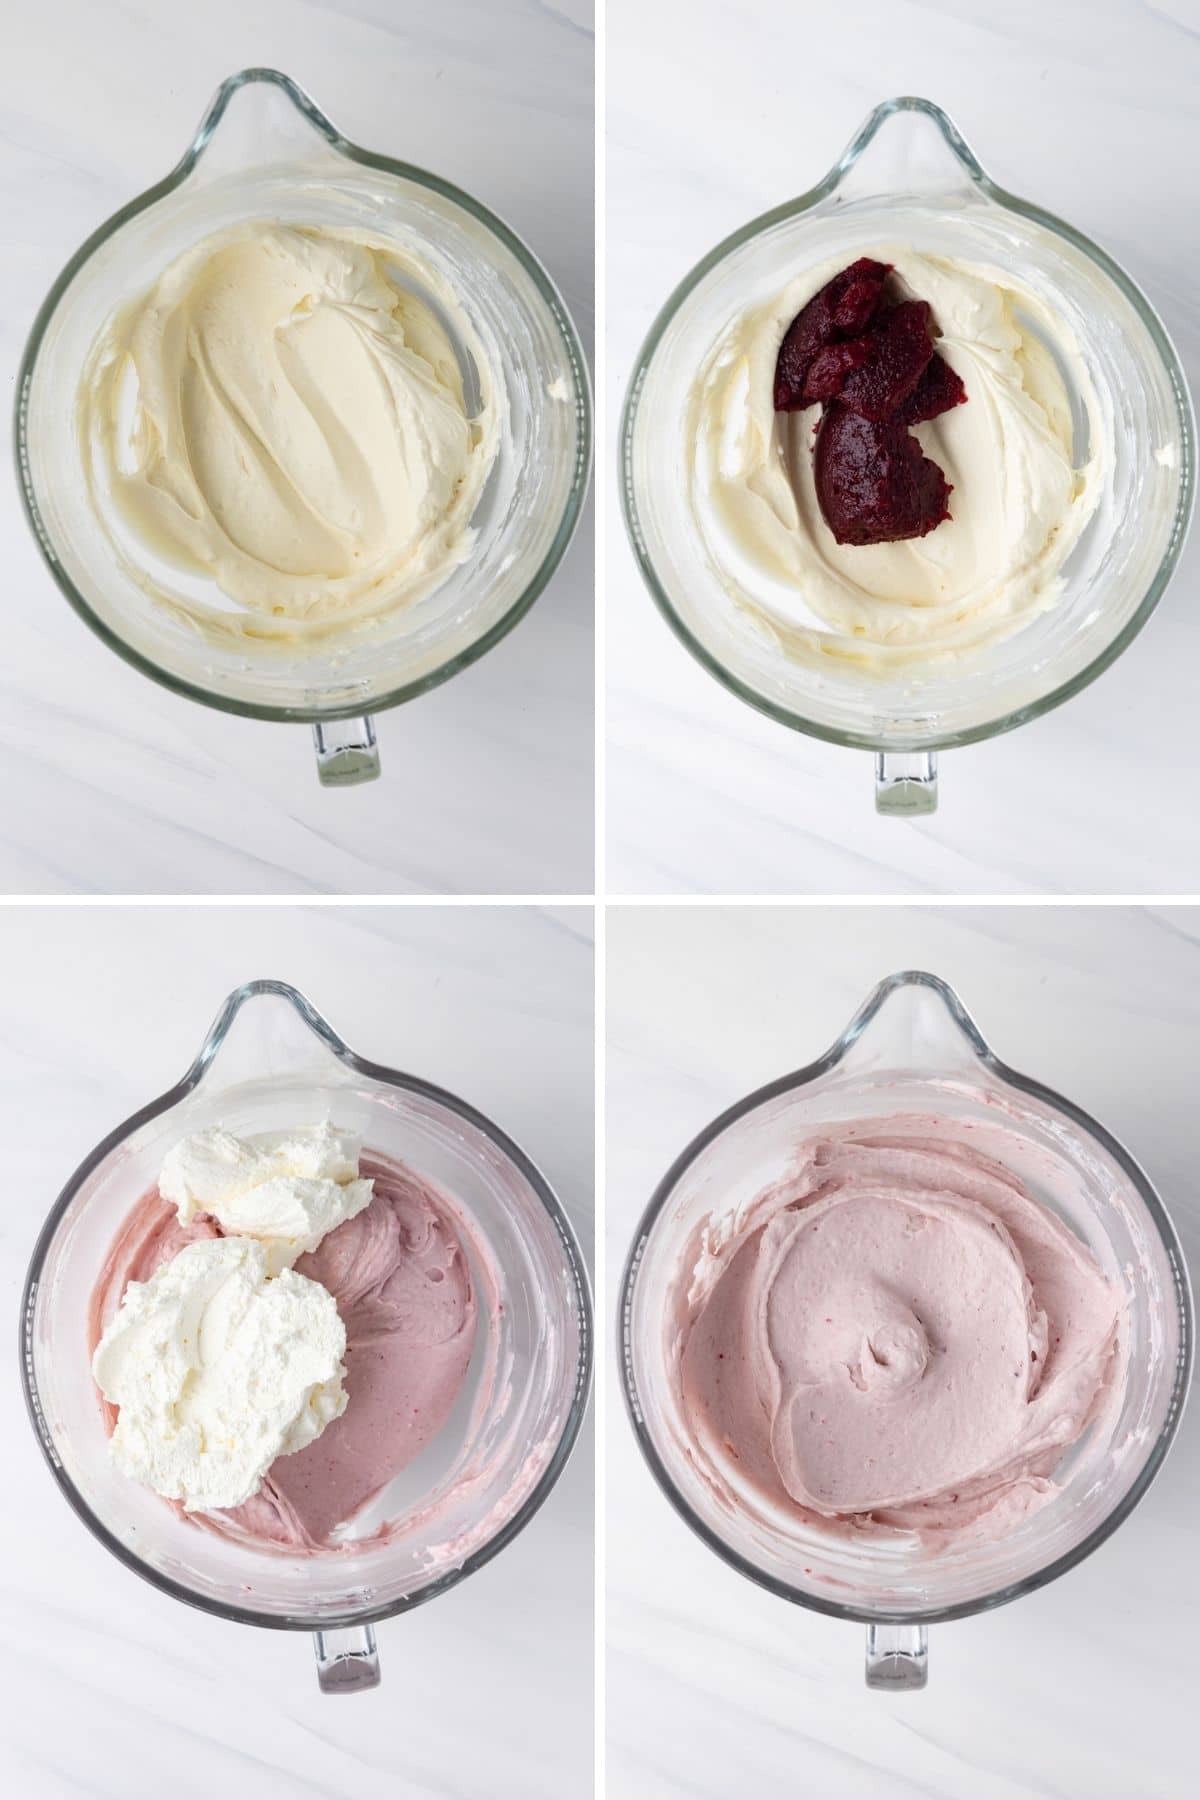 Process shots showing how to make no bake berry cheesecake.